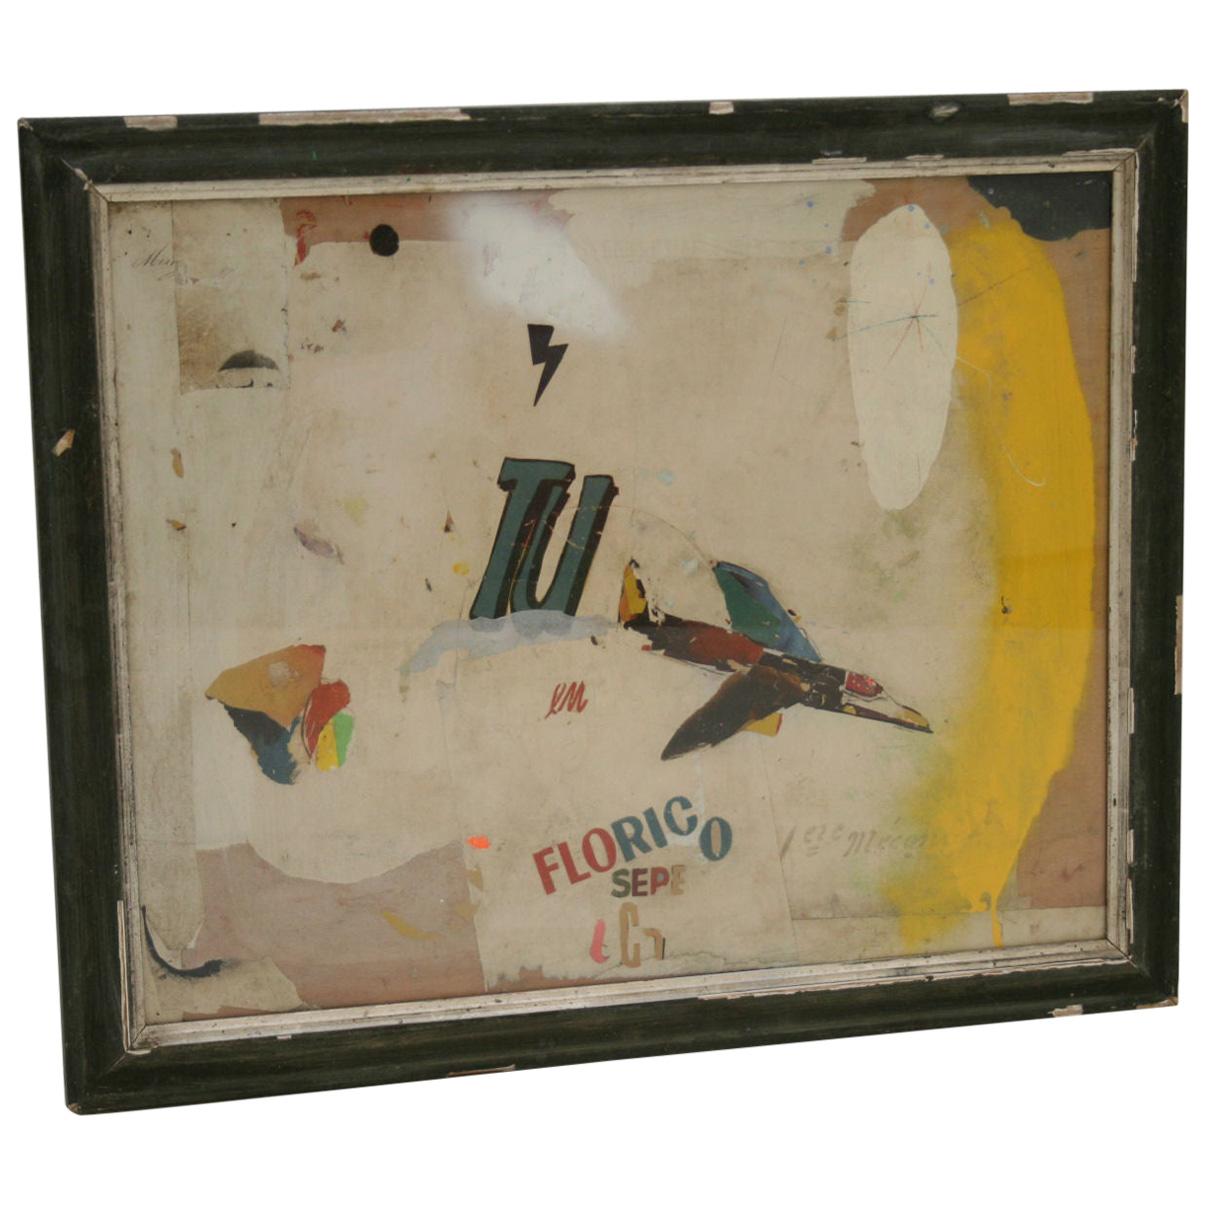 Firmament
Abstract Collage by Artist Huw Griffith.
Collage: 19th century French ephemera, film posters from ‘30s, ‘40s & ‘50s, graphite crayons and household paint.
The collage has been placed into an antique frame which has been reworked by Huw